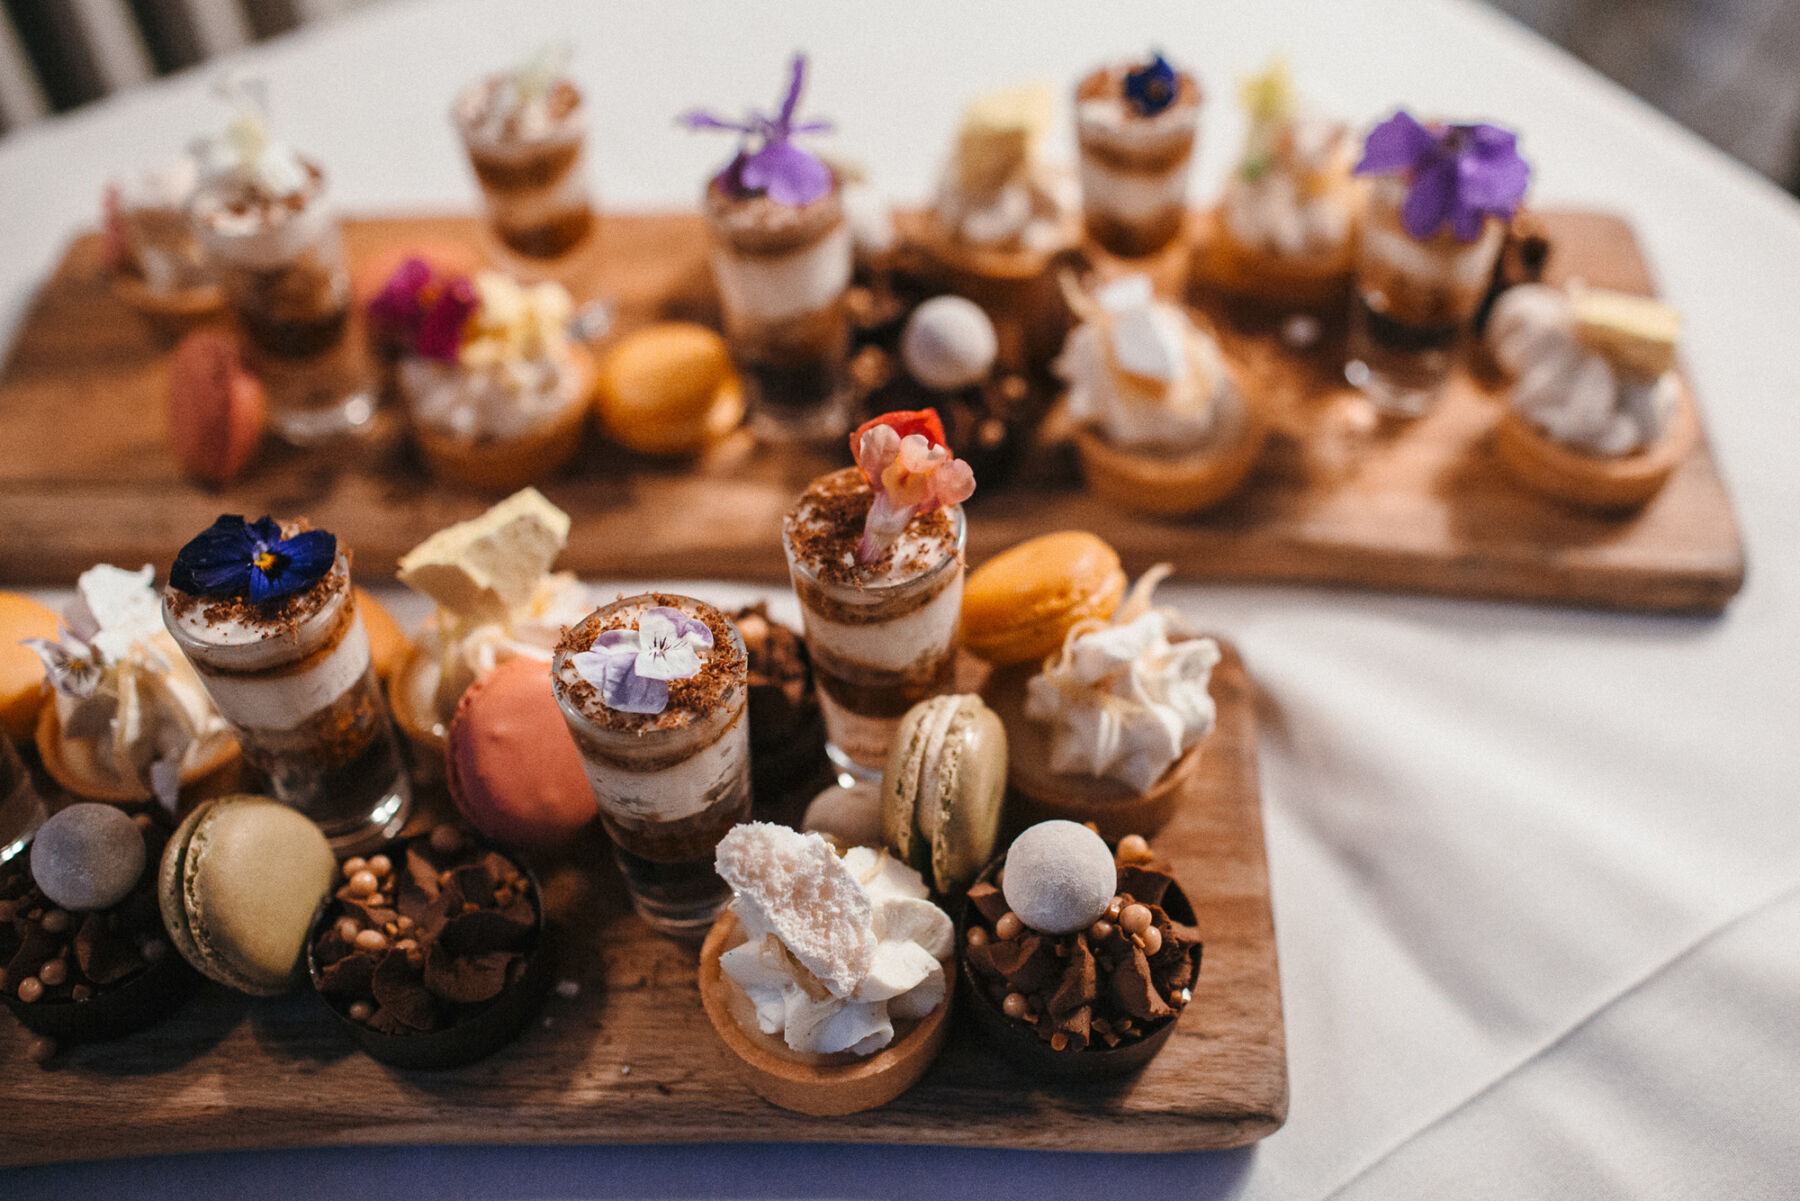 Creative wedding desserts and canapes on wooden trays including edible flowers.